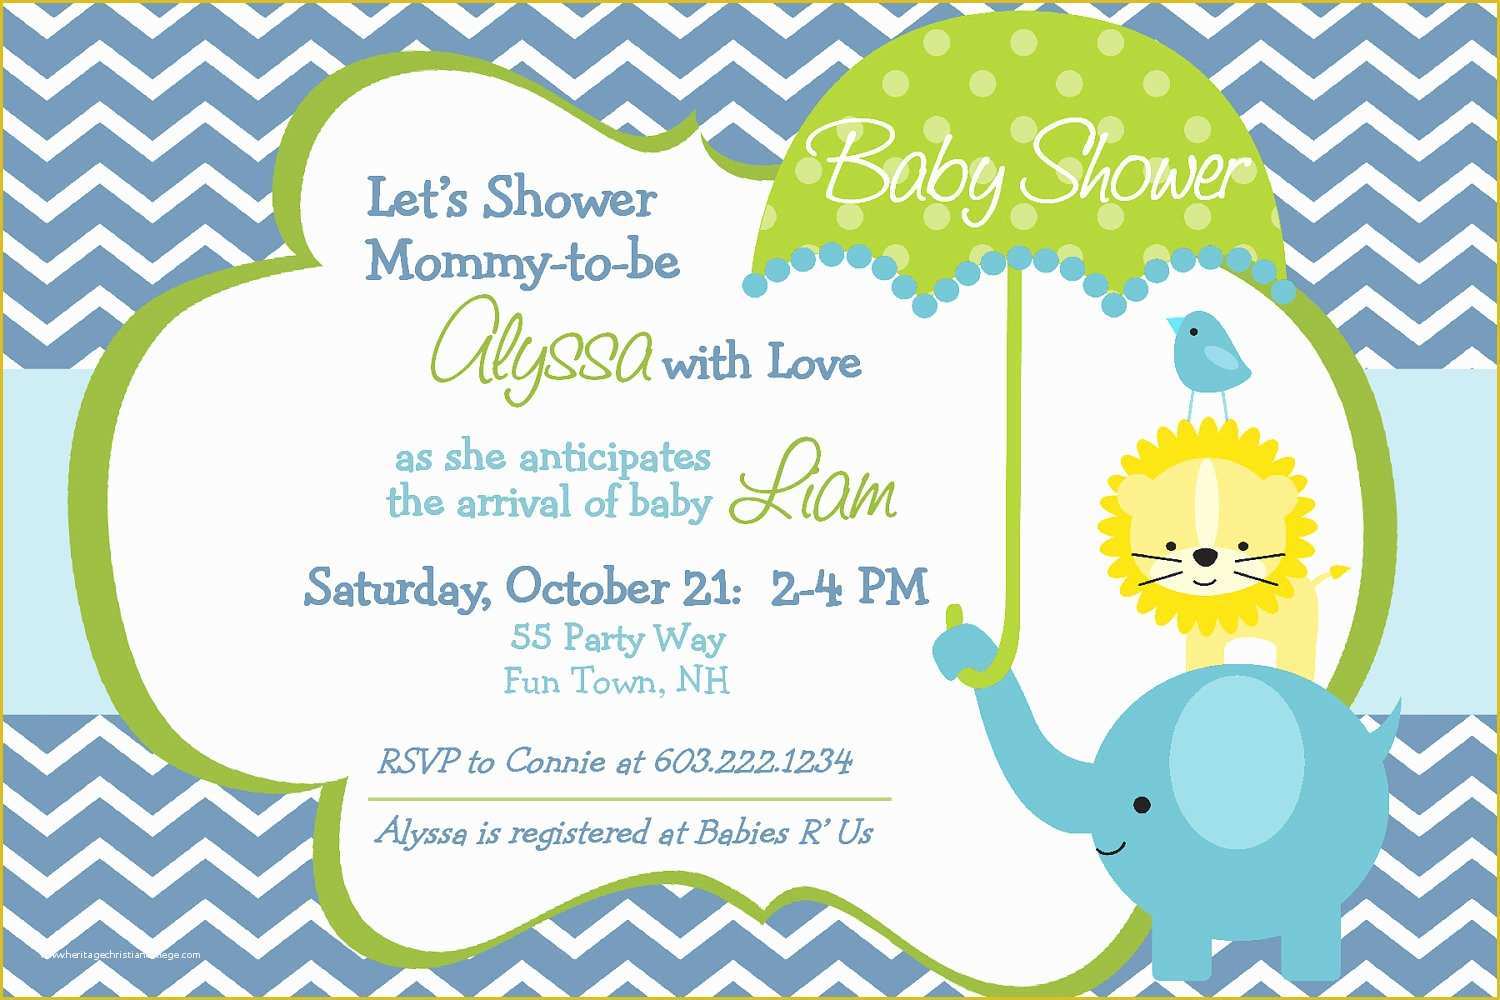 Free Baby Shower Invitation Templates Of Baby Shower Invitations for Boy & Girls Baby Shower